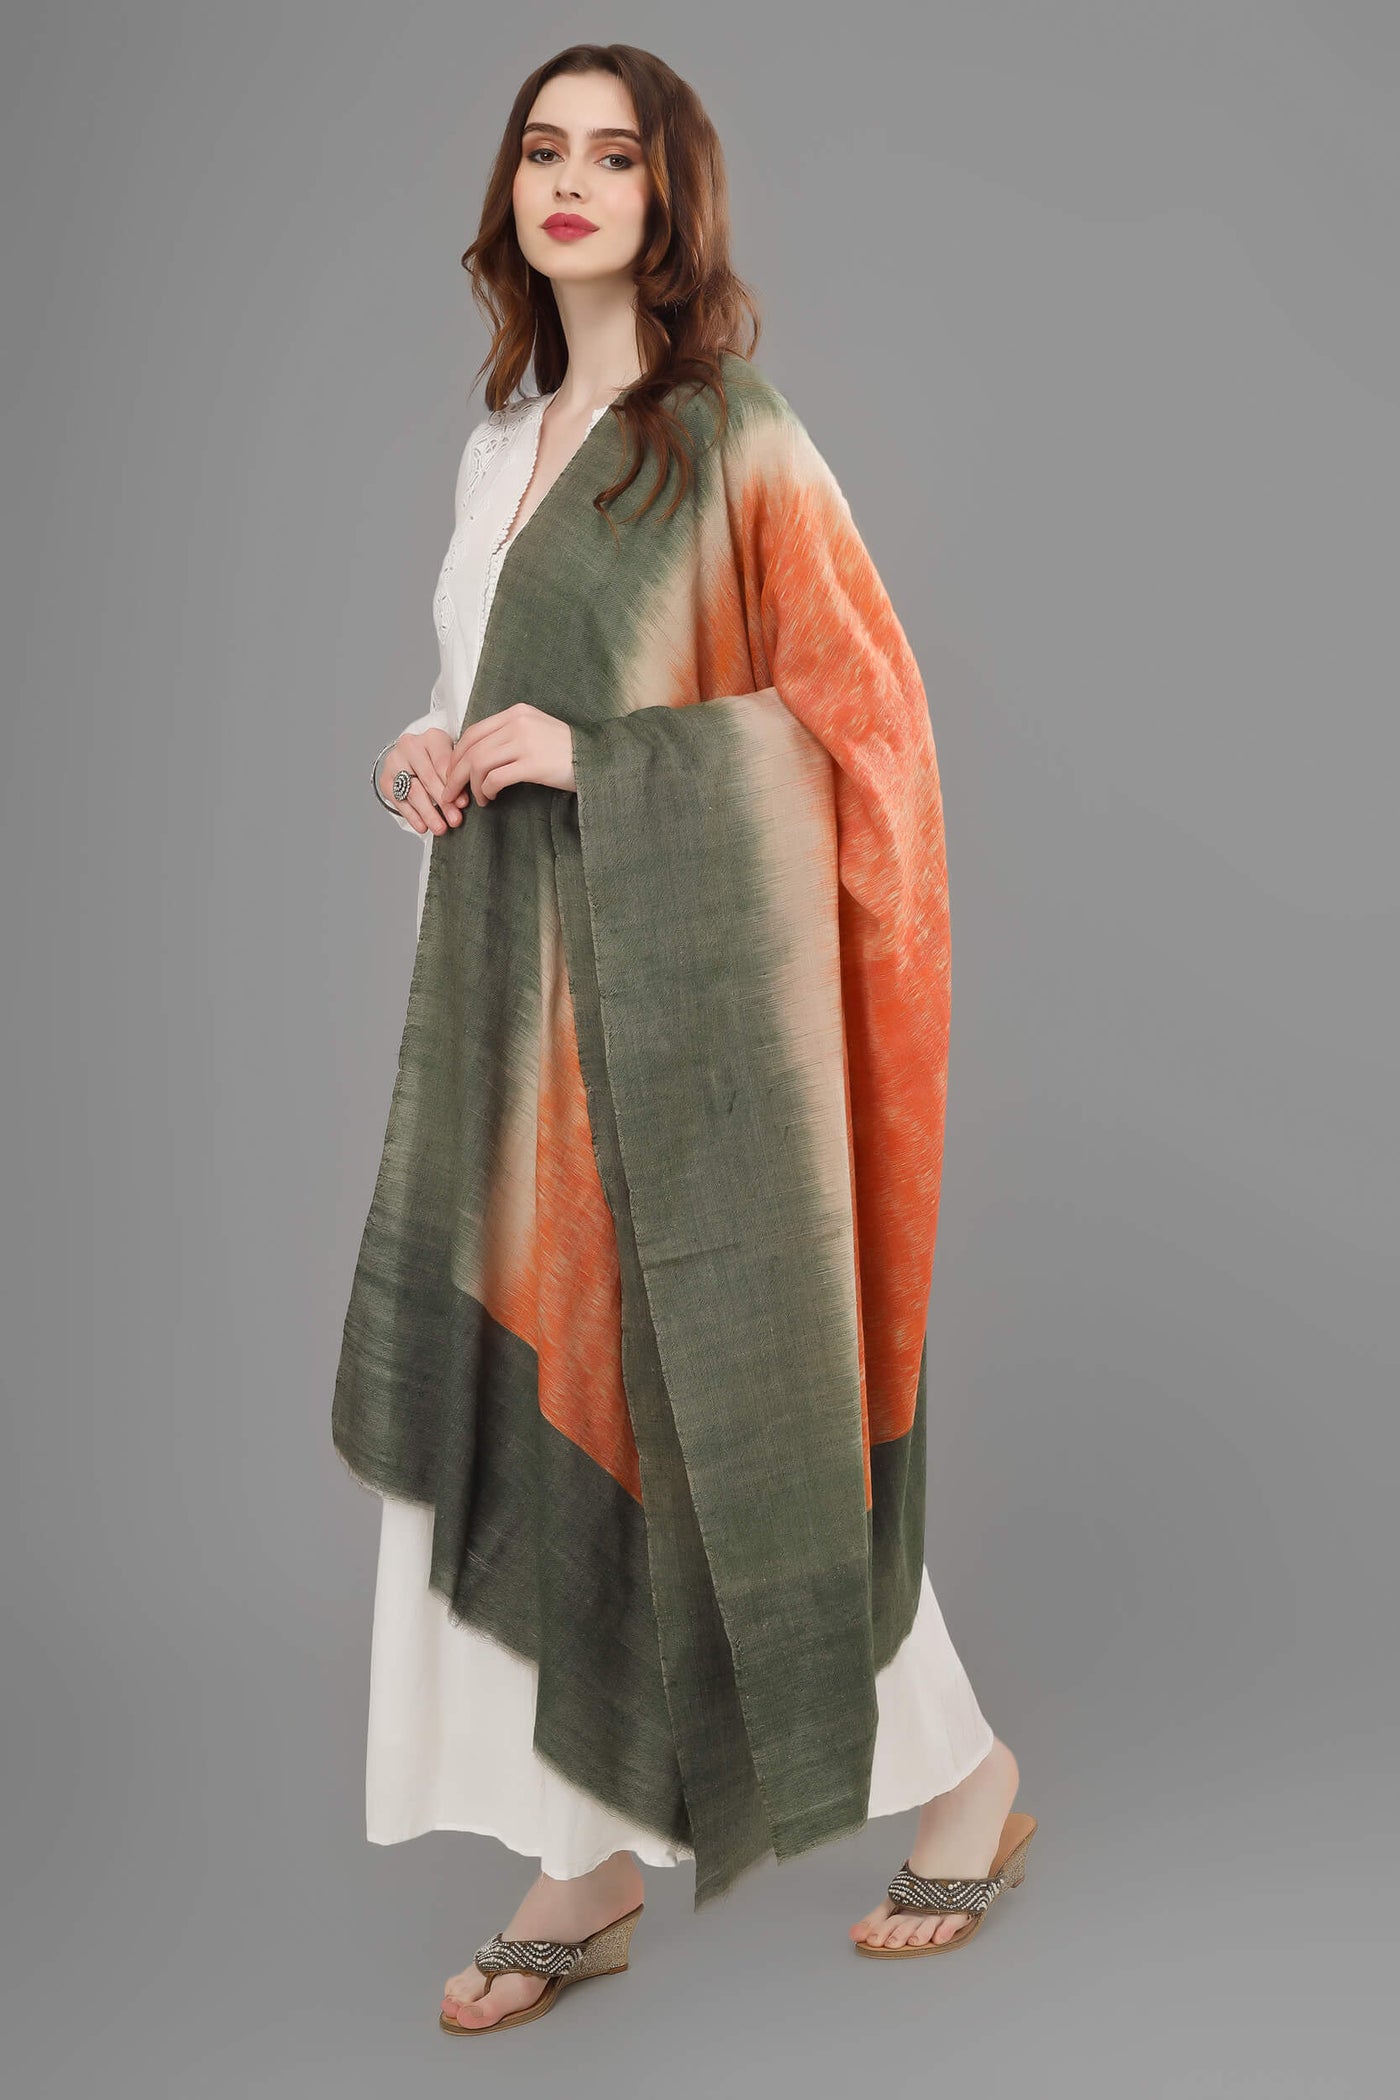 This luxurious, authentic and handmade Pashmina Stole, designed in a Dubai Ikkat pattern, is crafted by the most talented and skilled Artisans. 